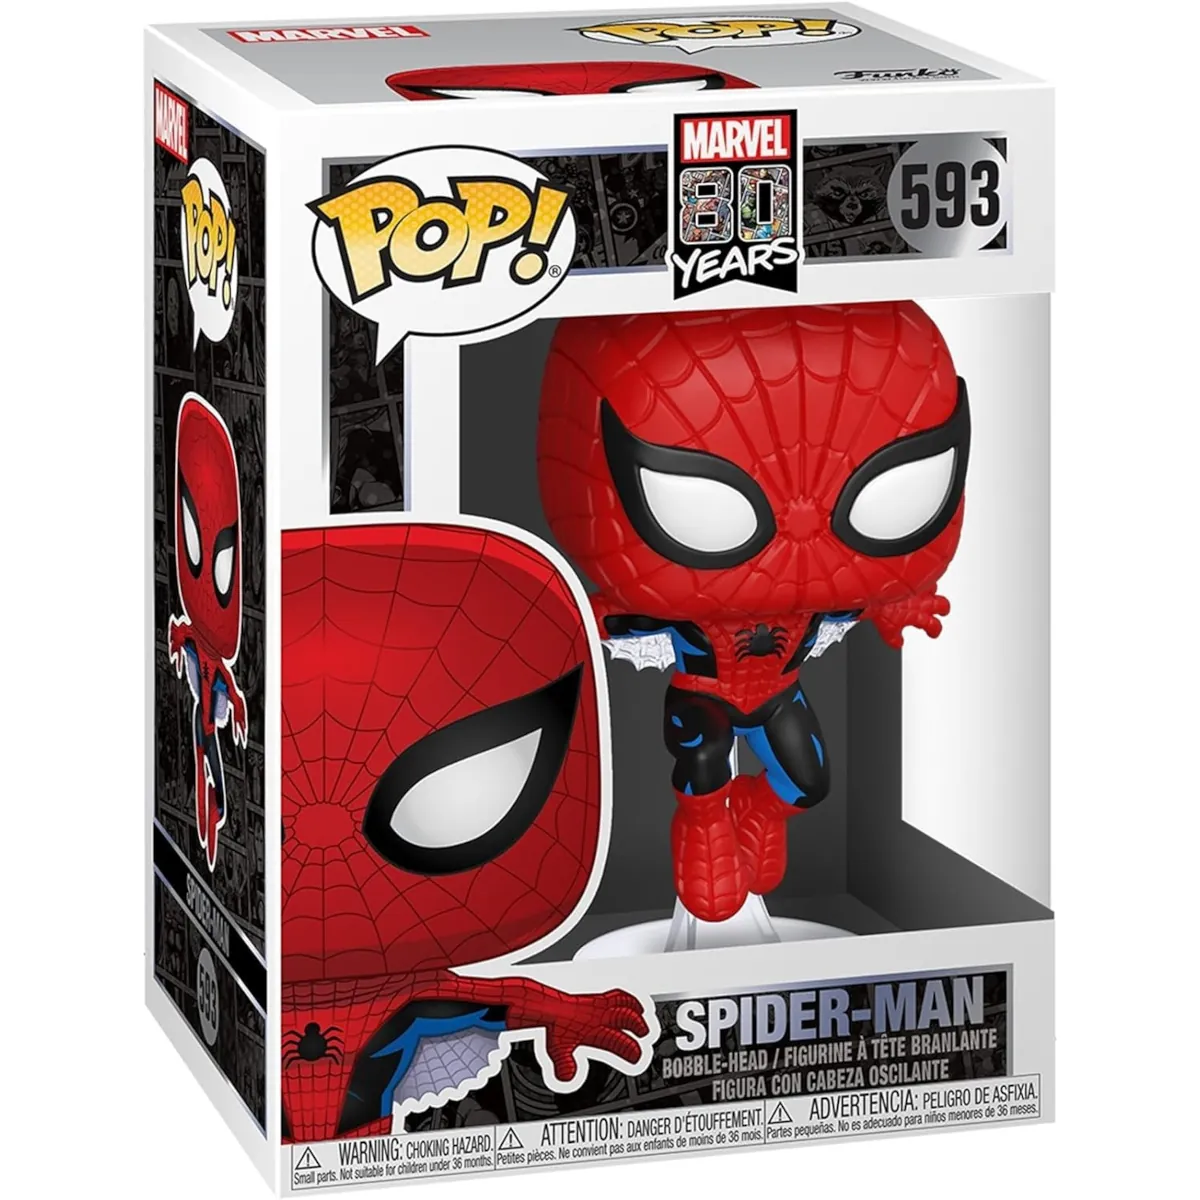 46952 Funko Pop! Marvel - 80 Years First Appearance - Spider-Man Collectable Vinyl Figure Box Front